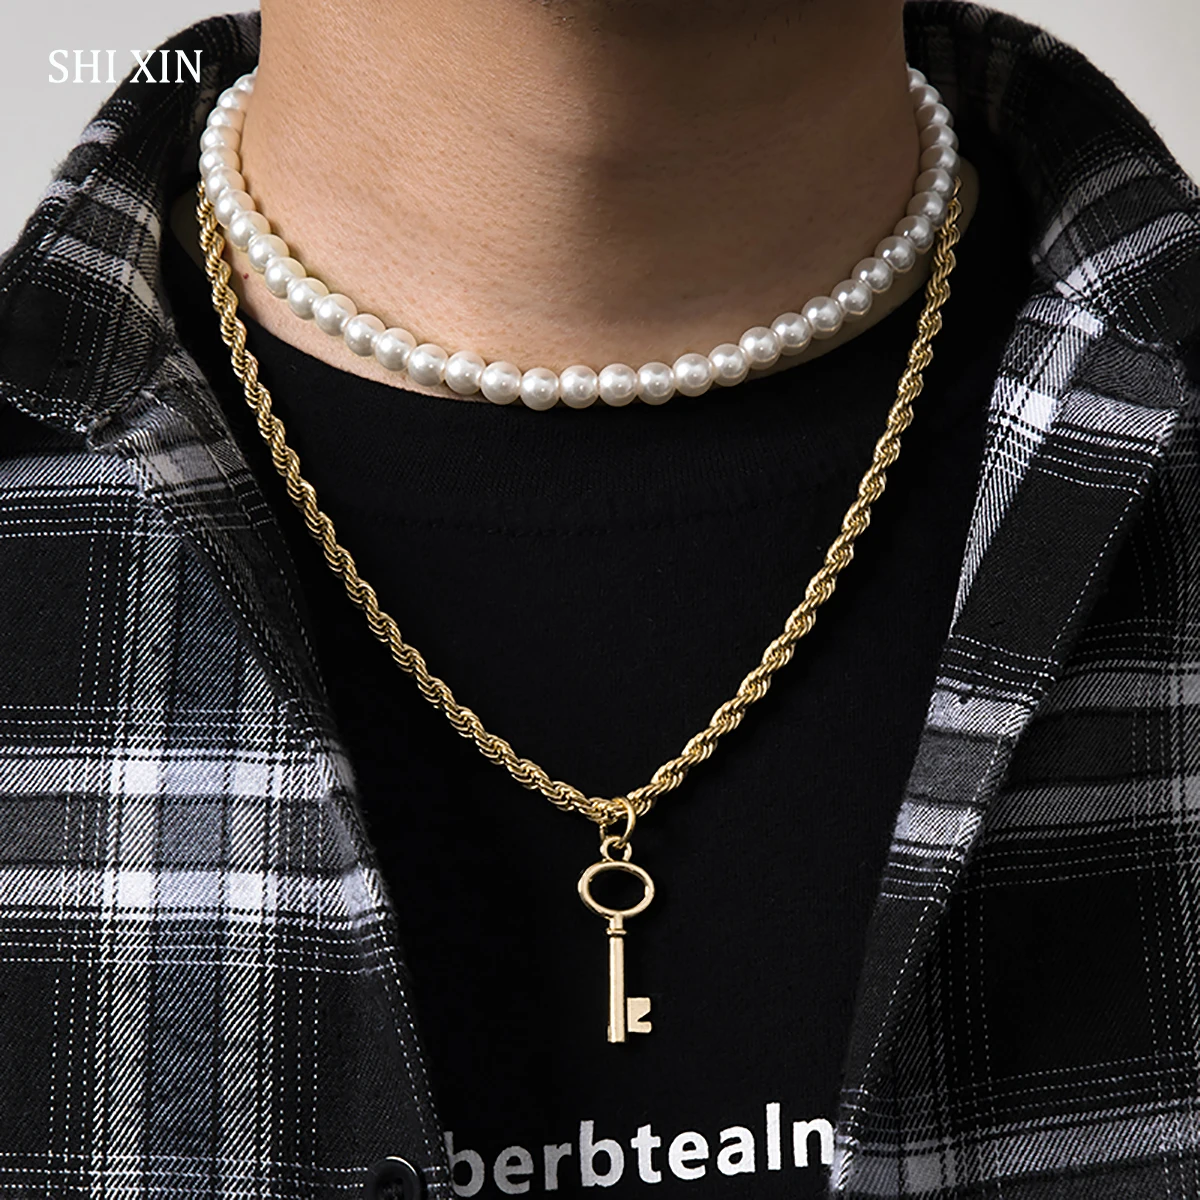 

SHIXIN Punk Layered Chain With Key Pendant Necklace Men Fashion Short Pearl Choker Necklace for Women Jewelry for Neck 2021 Gift